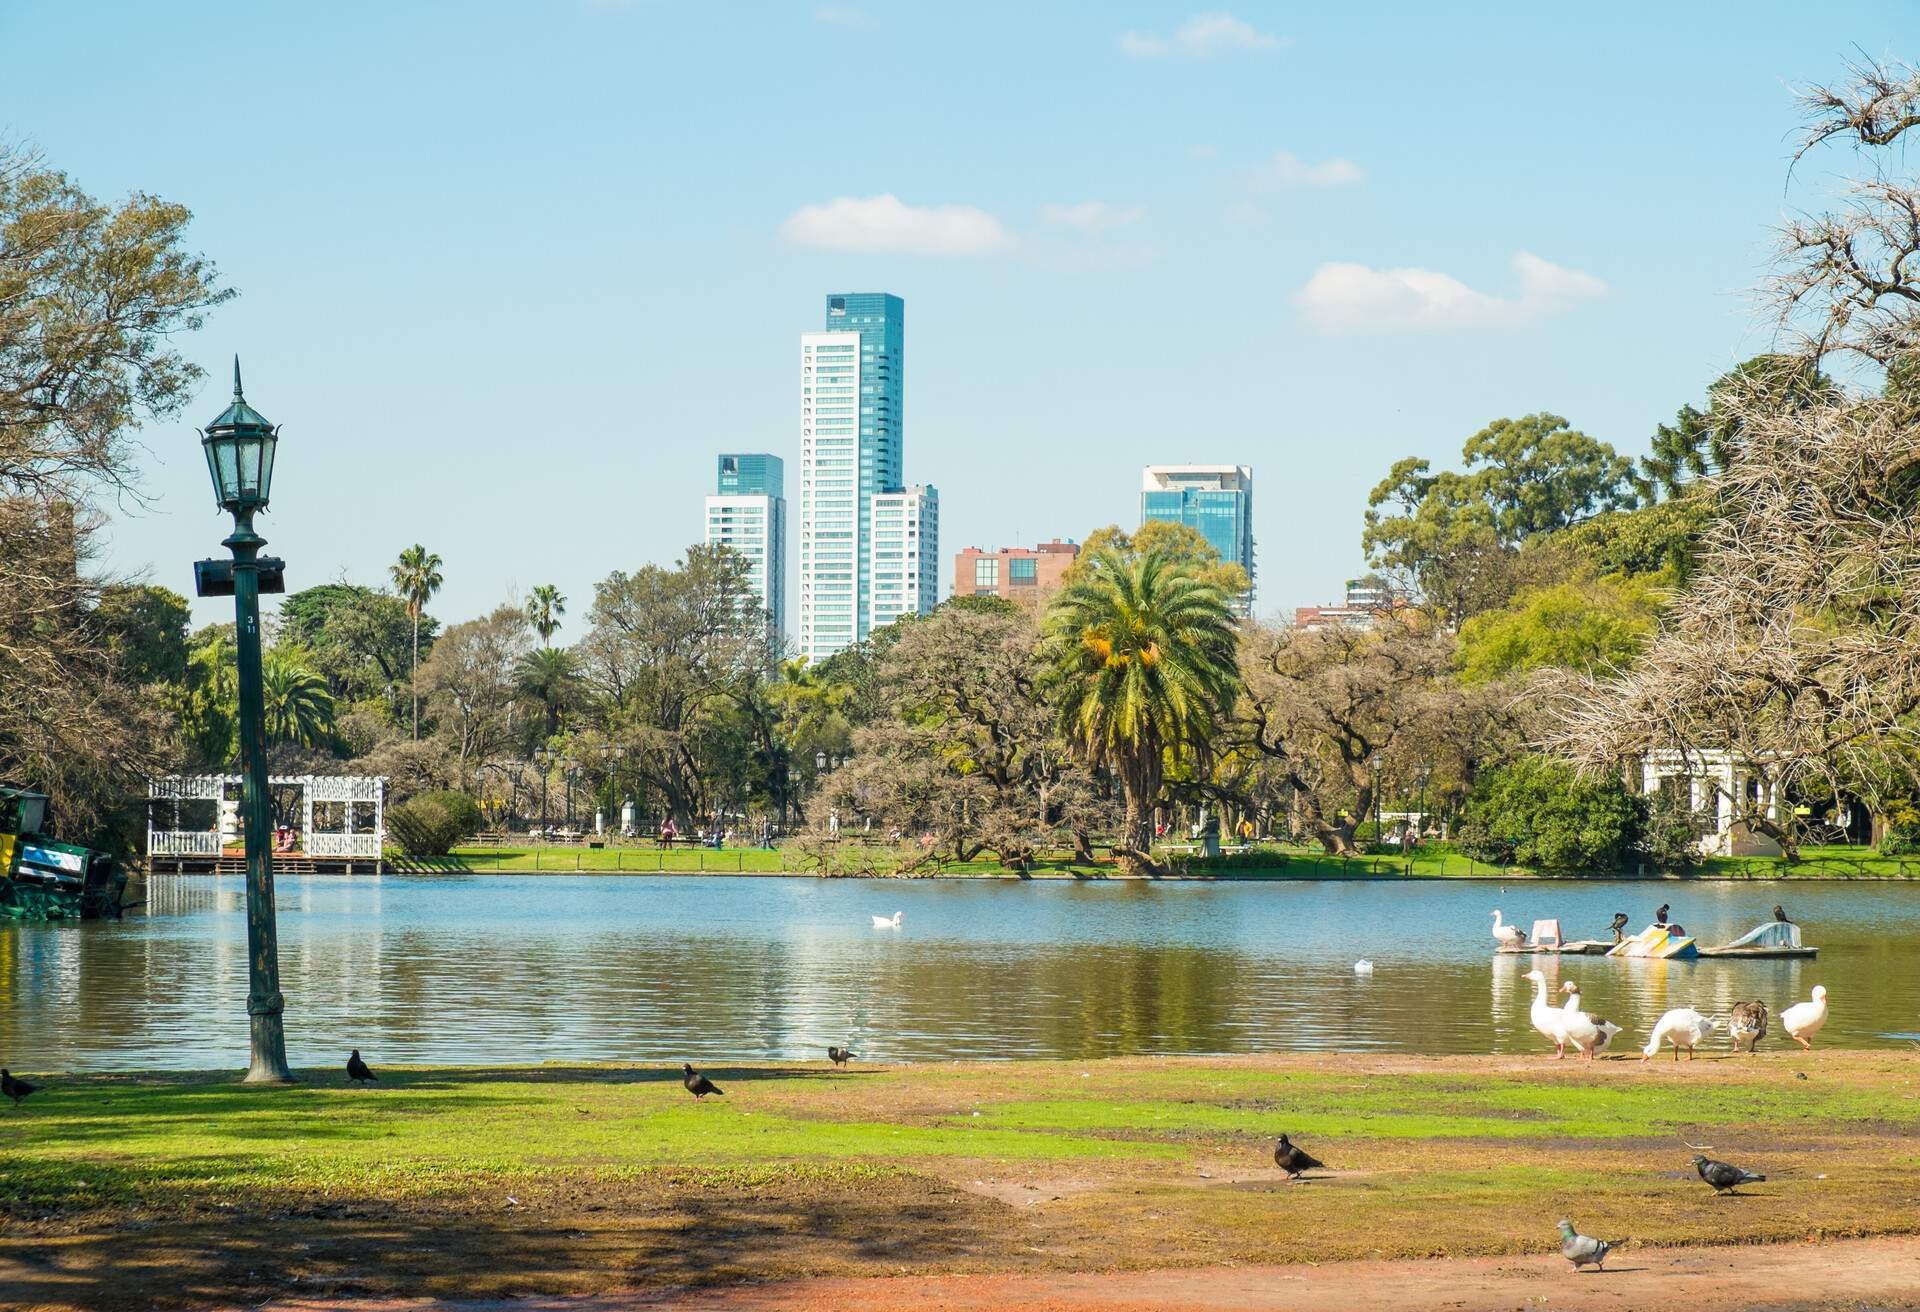 Downtown Buenos Aires parks in the Palermo neighborhood known as Palermo Woods